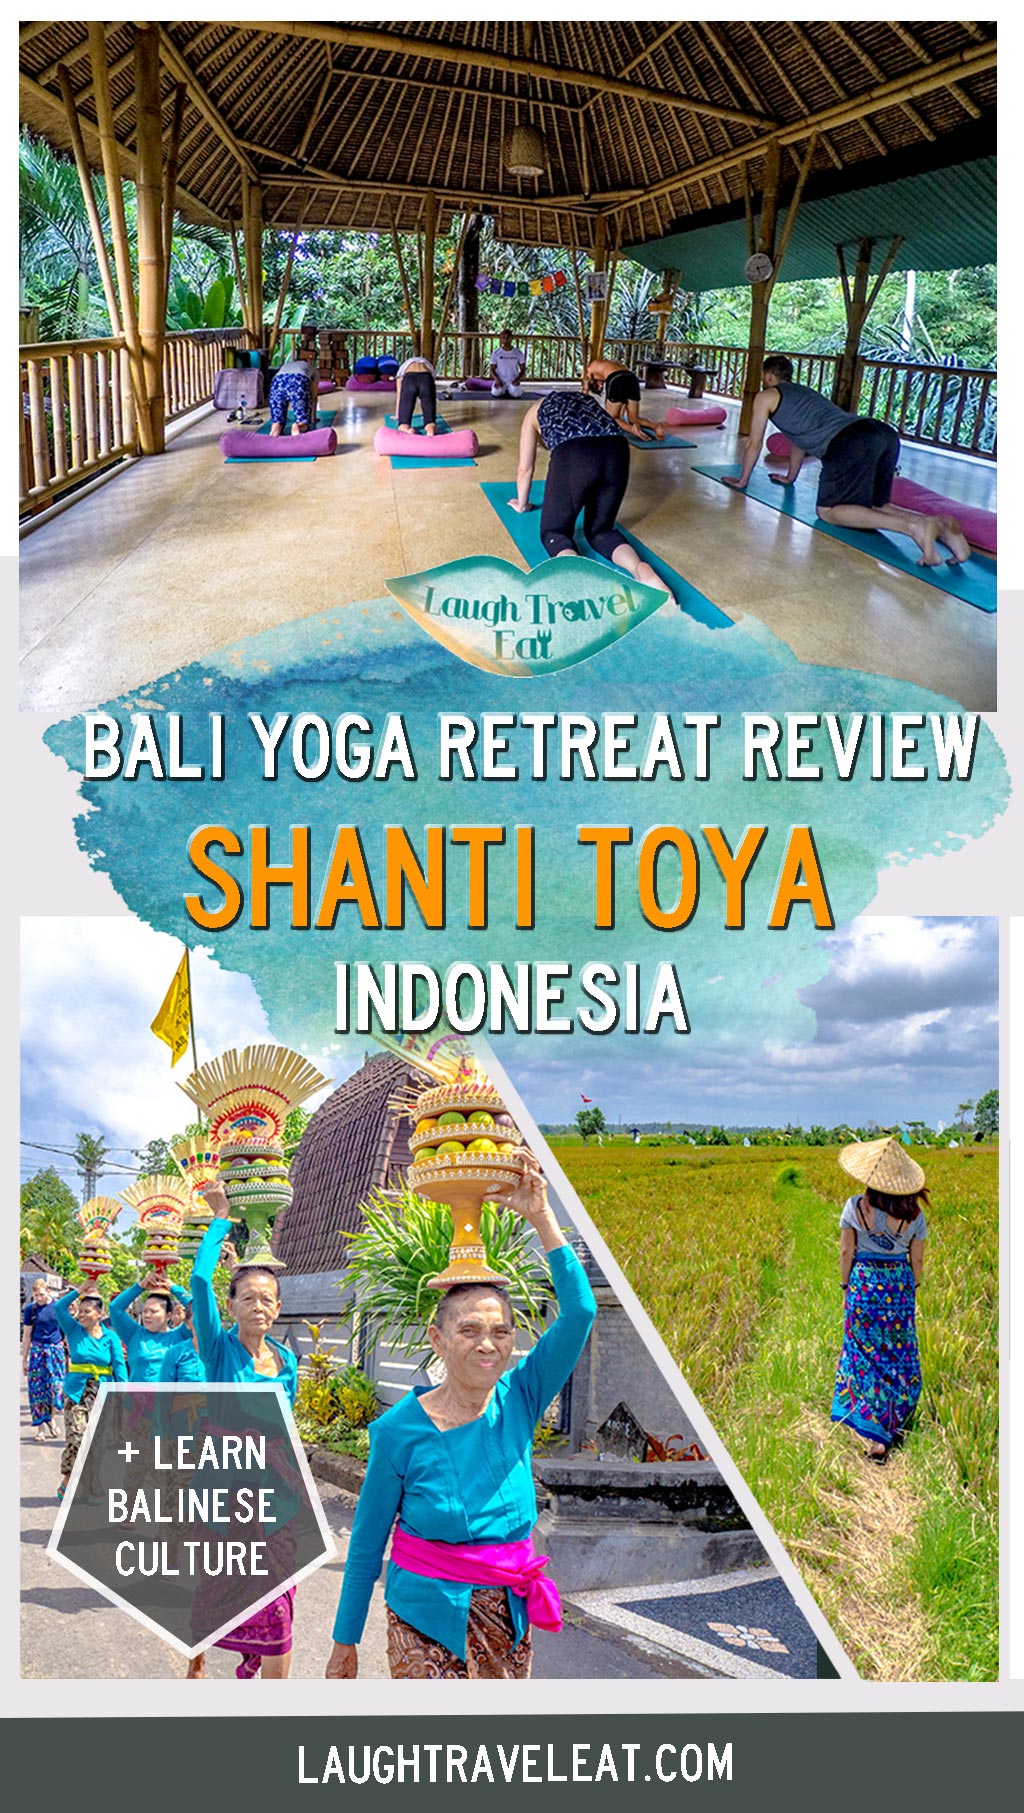 Yoga retreats in Bali are a popular thing, whether you are looking for a week-long introduction or full-fledged teachers training. As a beginner, I wanted to find something affordable where I can ease into yoga but also have the opportunity to learn more about Bali’s culture. Shanti Toya Ashram just 30 minutes from Ubud tick all the boxes and then some, offering a week-long yoga retreat with daily activities to keep you occupied. #Bali #yogaretreat #ubud